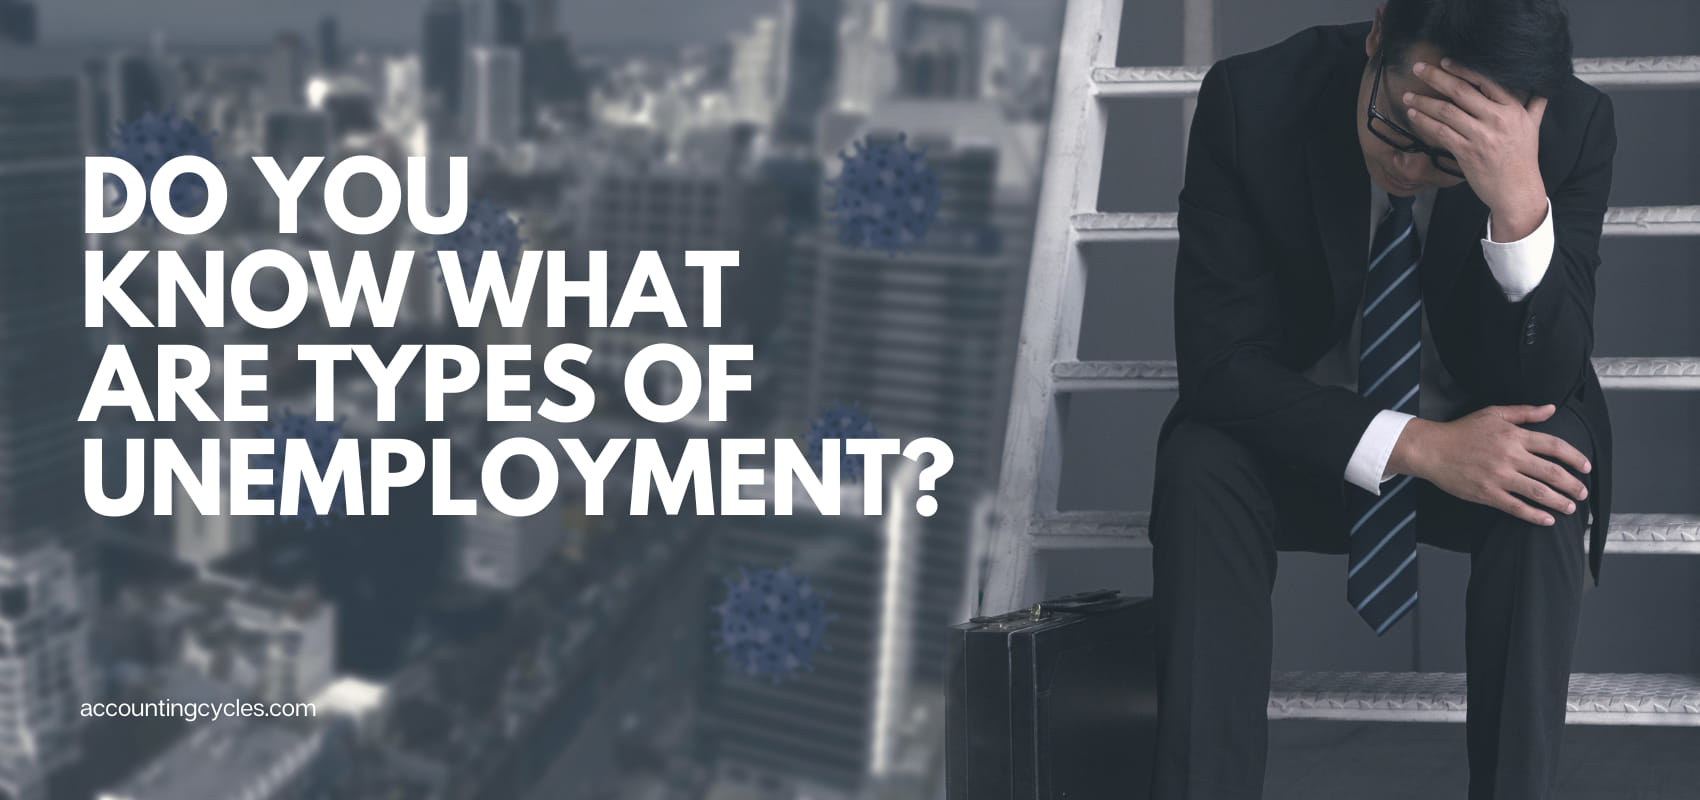 Do You Know What Are Types of Unemployment?